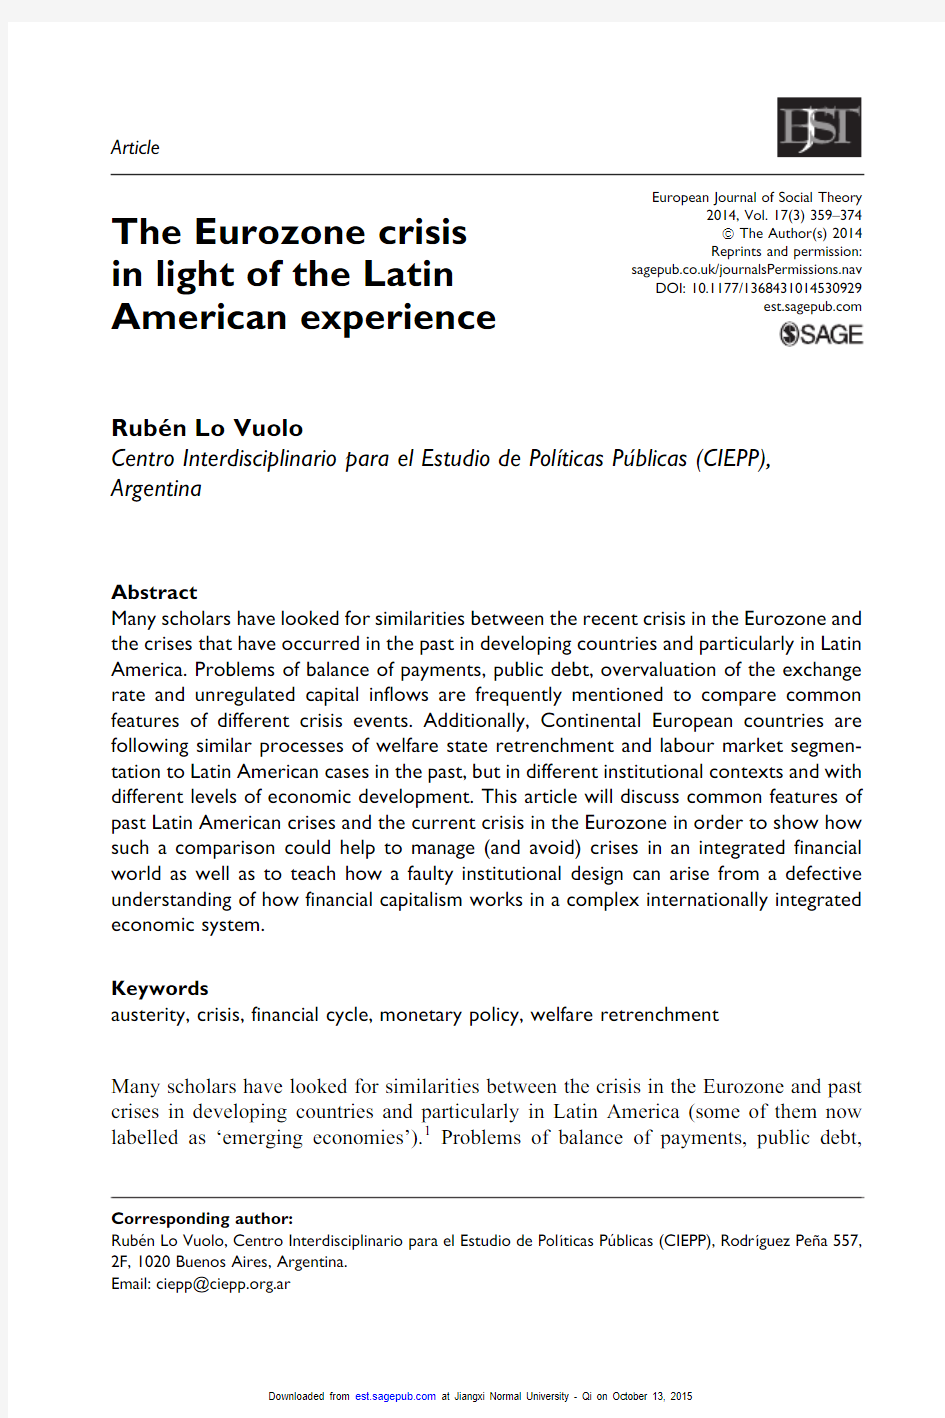 The Eurozone crisis in light of the Latin American experience